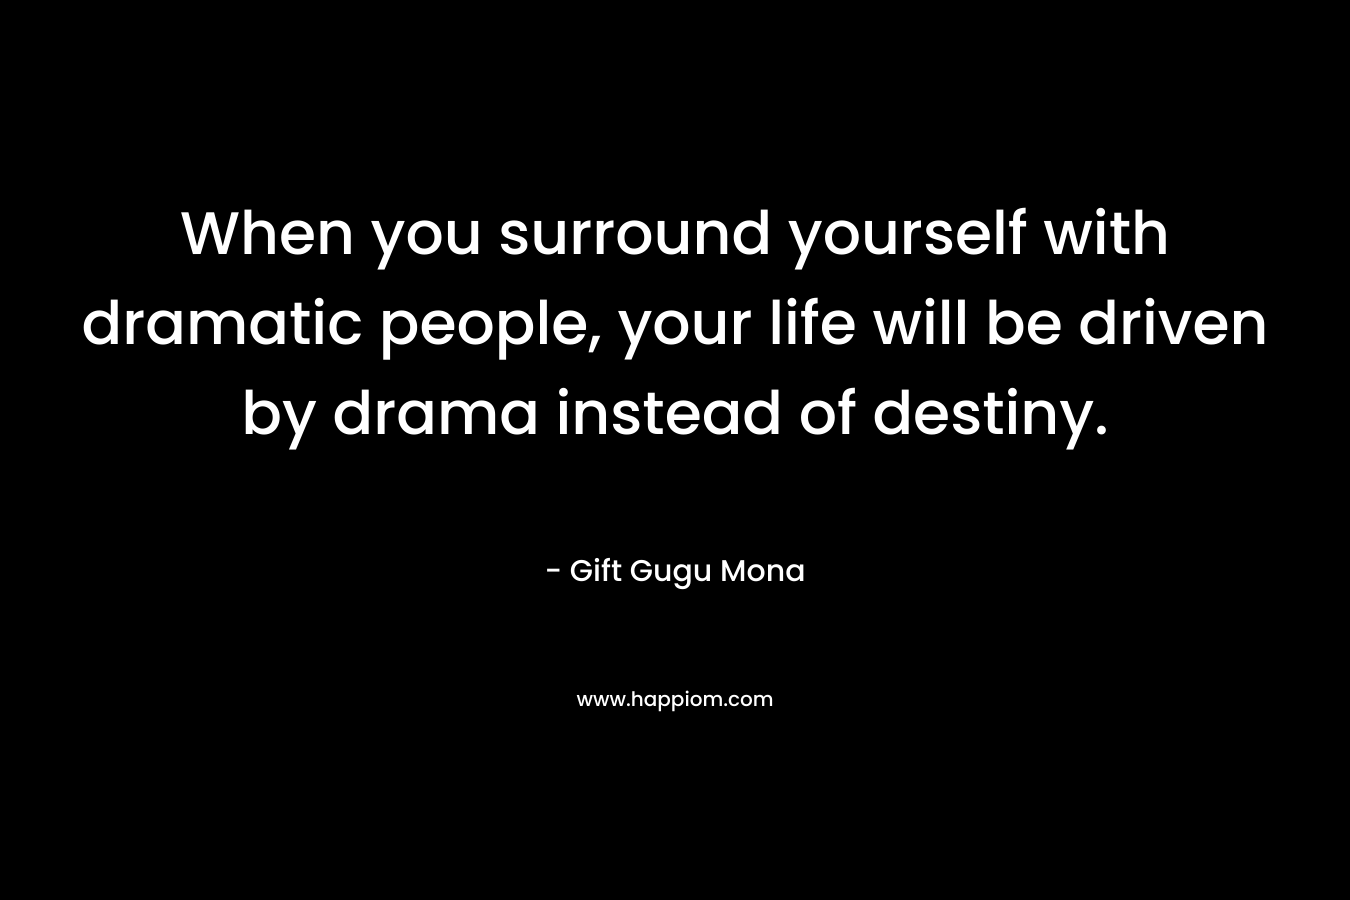 When you surround yourself with dramatic people, your life will be driven by drama instead of destiny. – Gift Gugu Mona